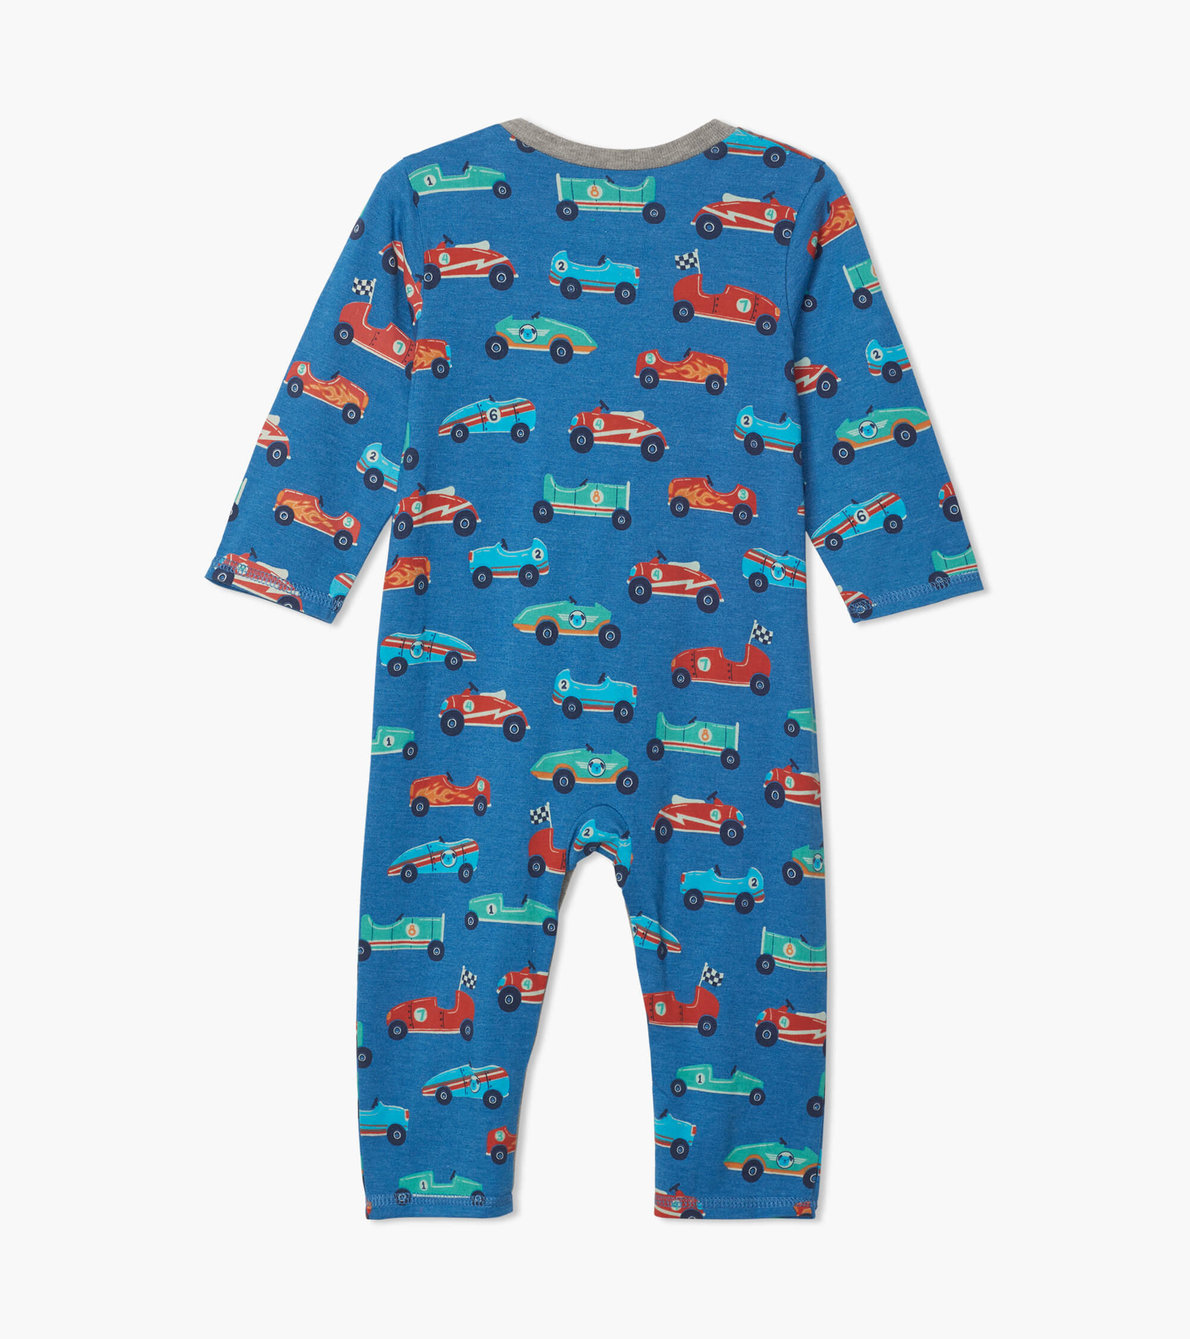 View larger image of Race Cars Baby Romper